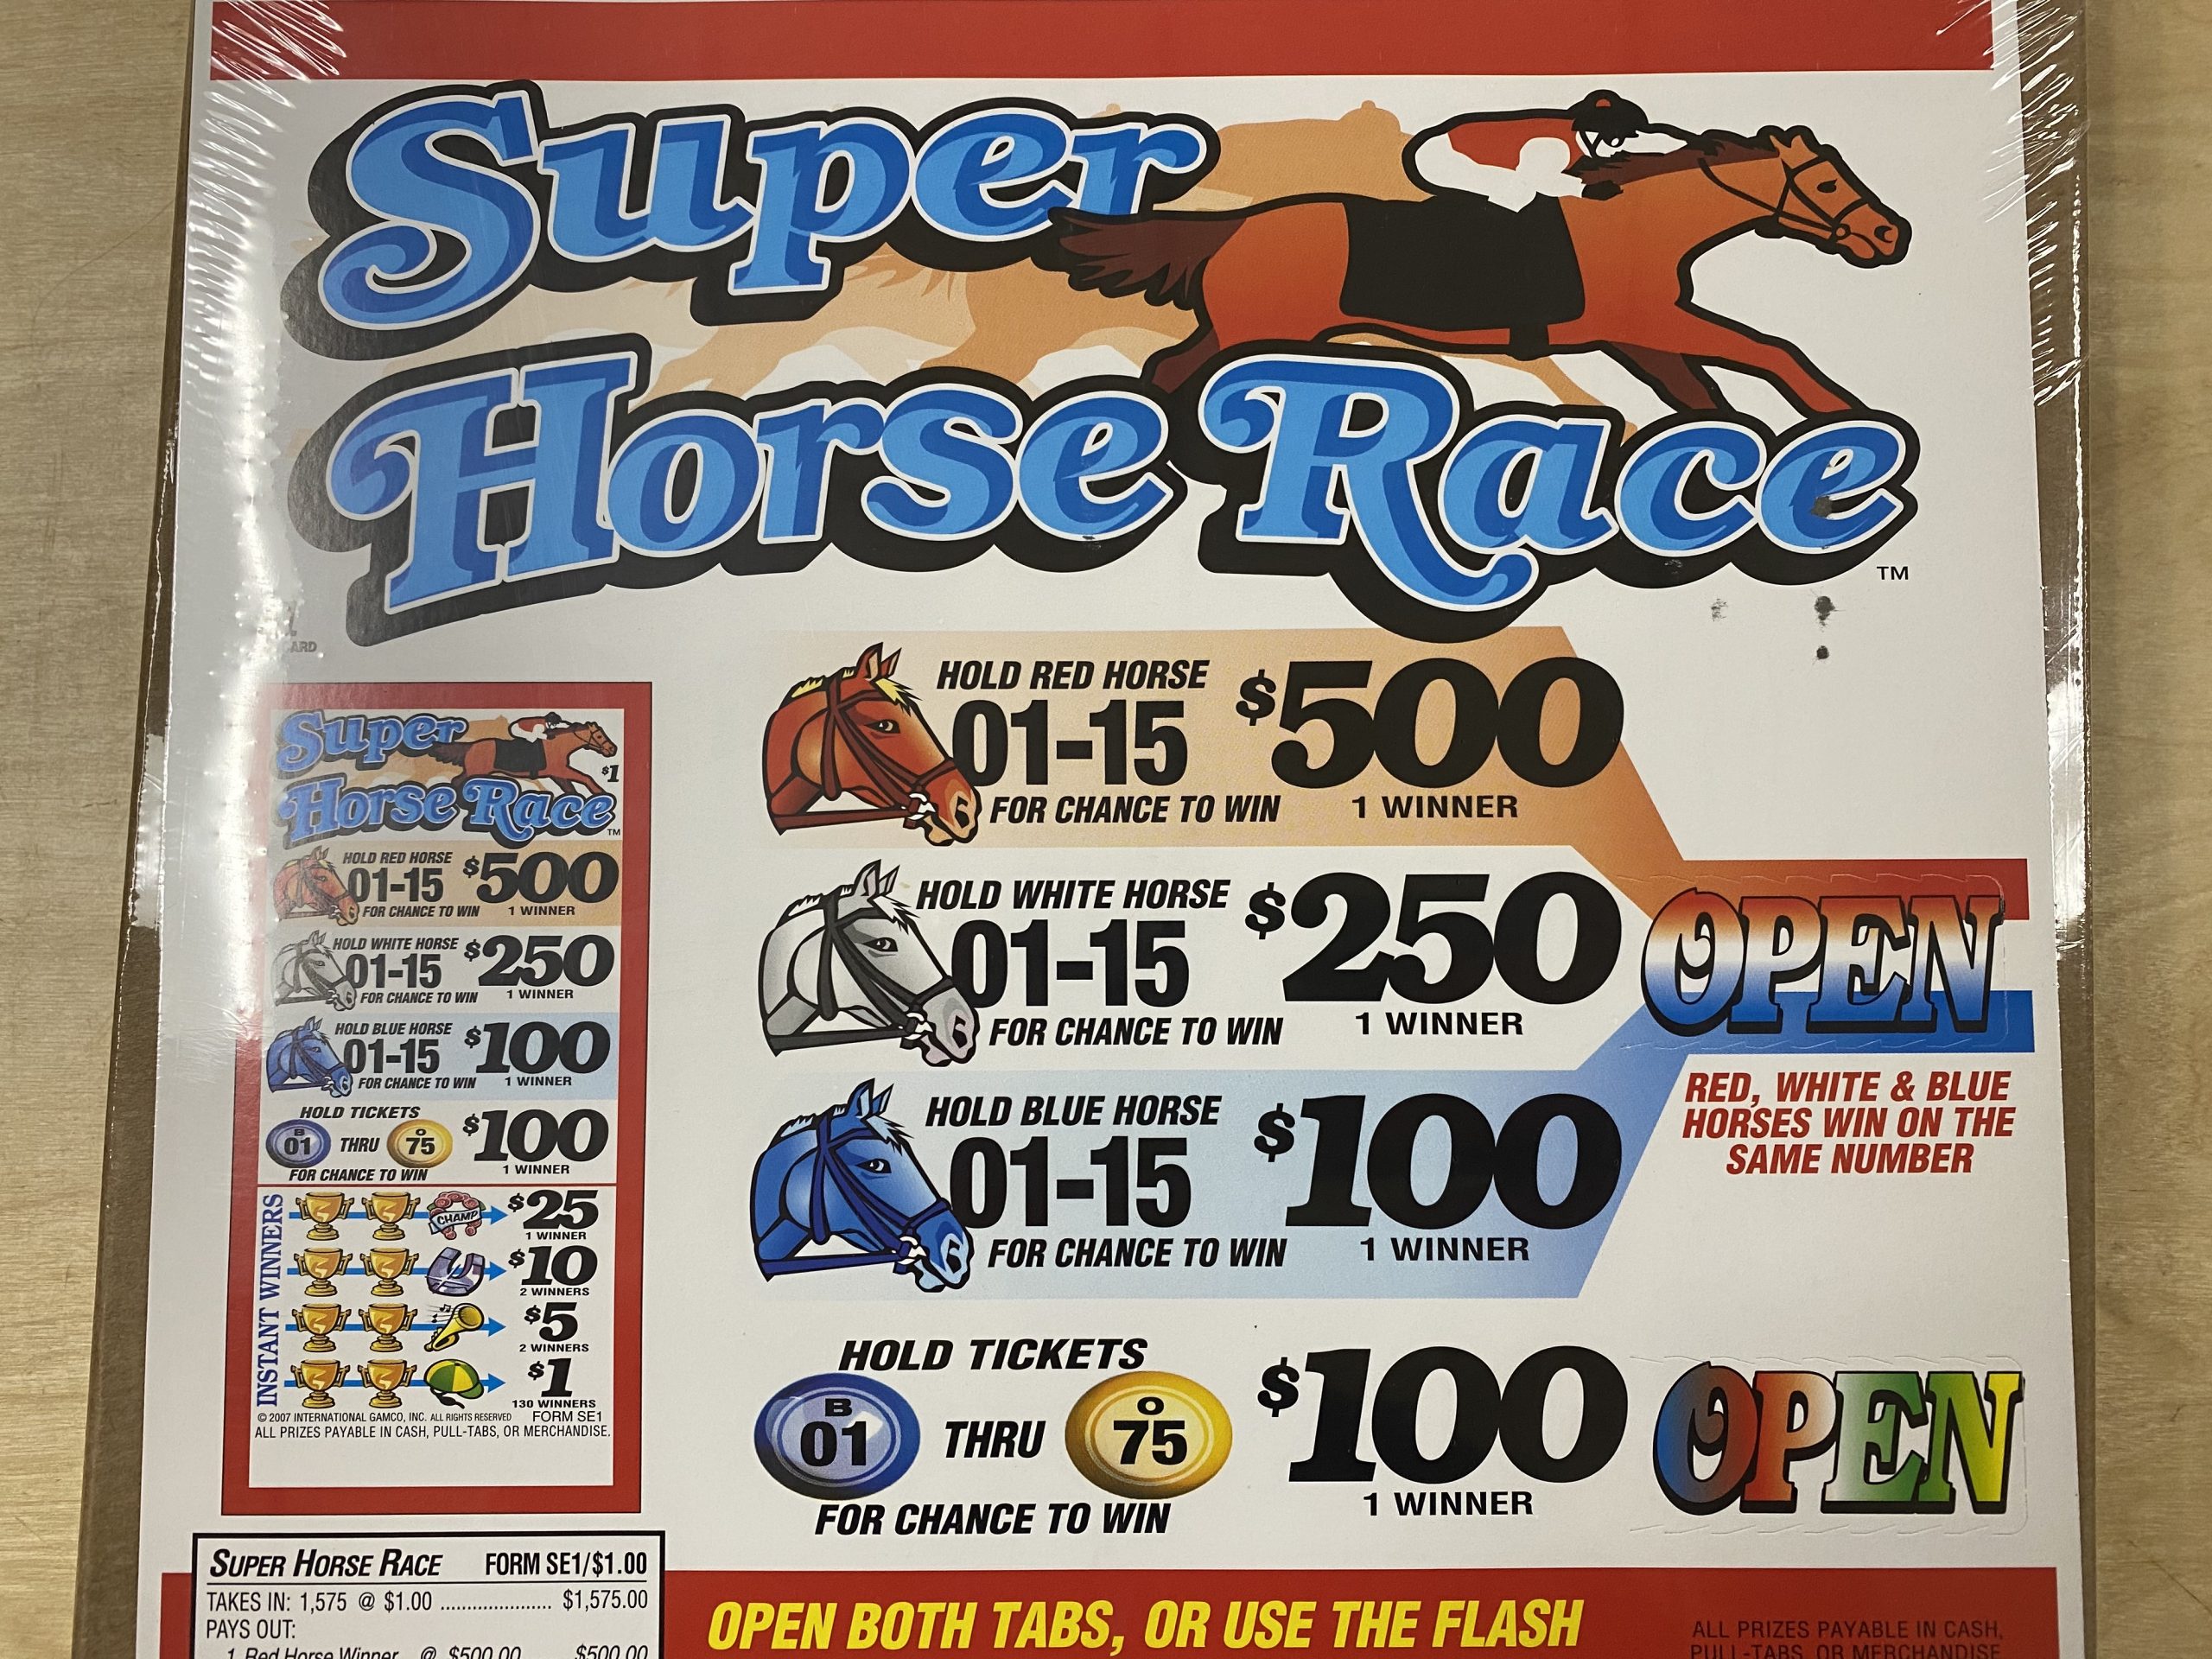 instant-tickets-super-horse-race-tuesday-10-6-20-at-4-pm